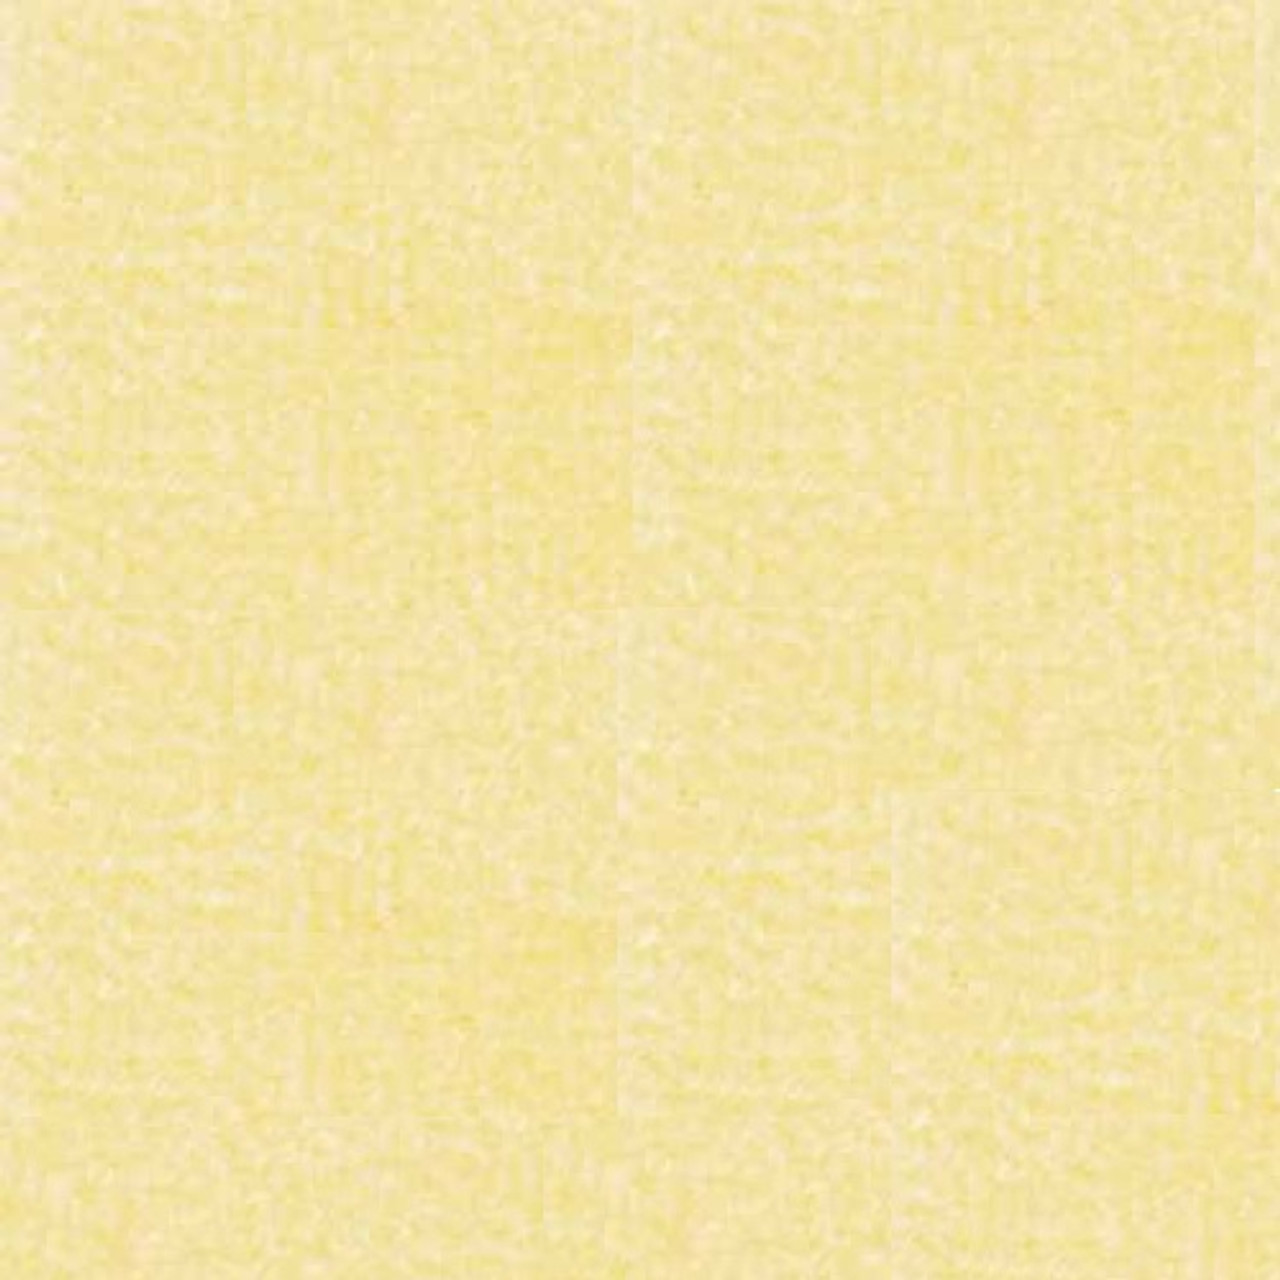 Swatch sample of butter-colored carpeting (MG6169C)